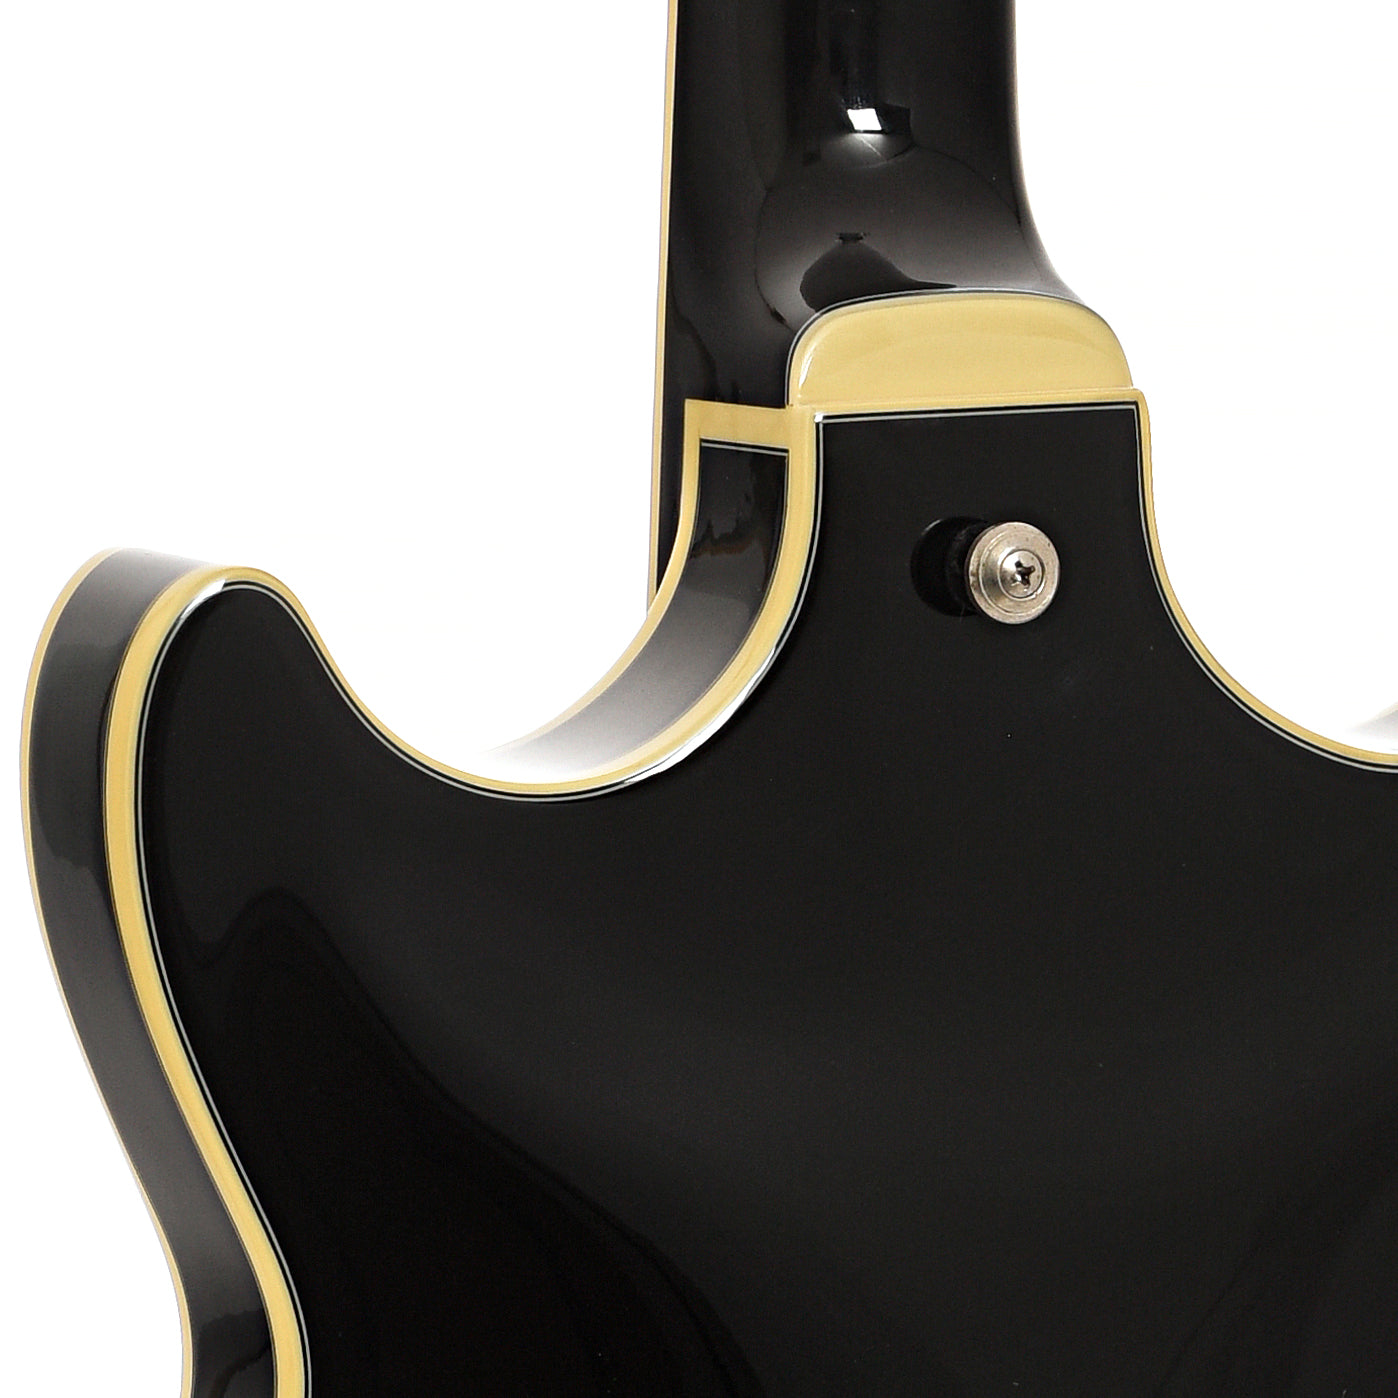 Neck joint of Ibanez Artcore AM73